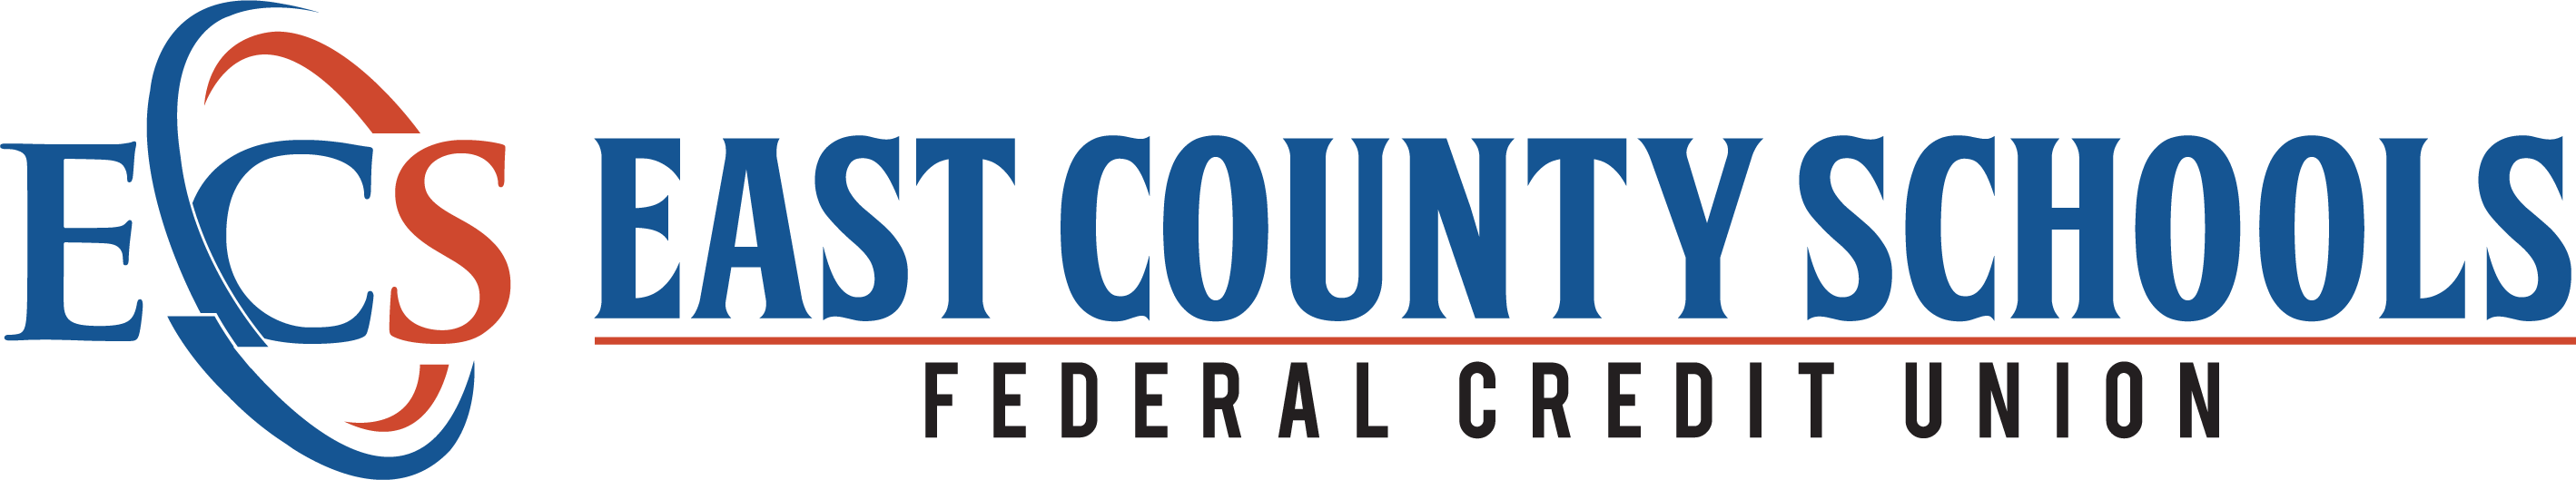 ECSFCU-logo-in-PNG.png